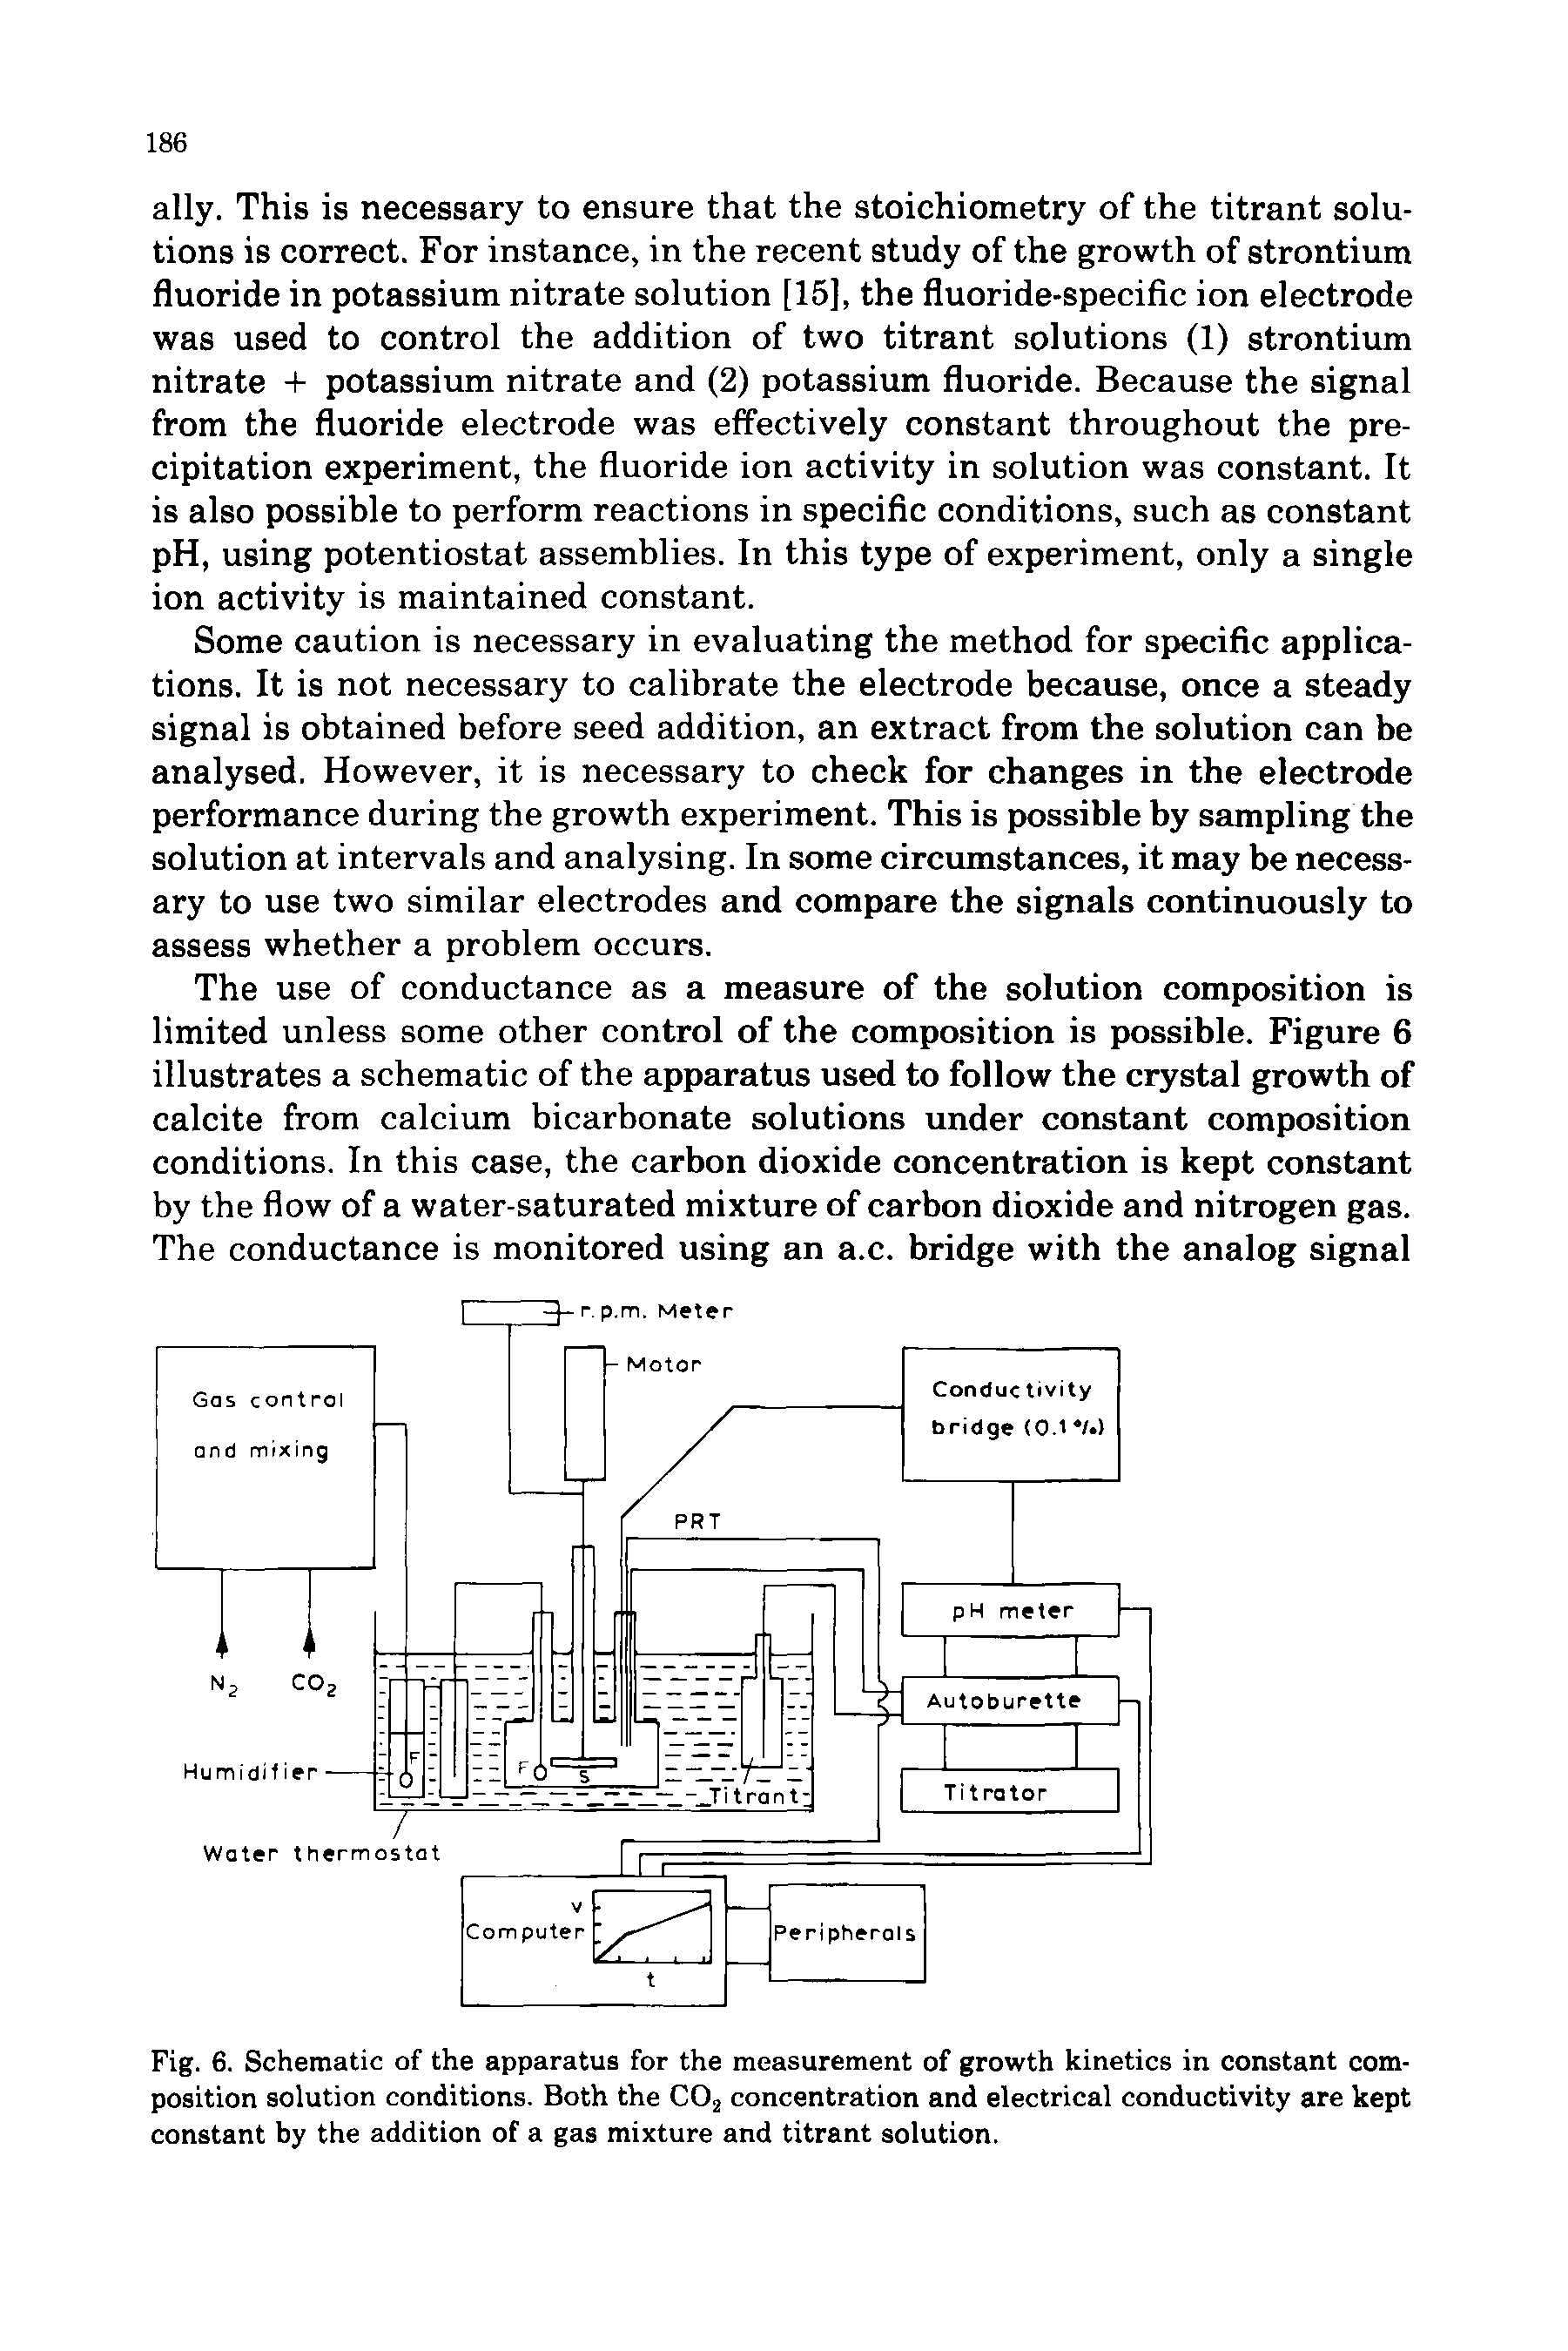 Fig. 6. Schematic of the apparatus for the measurement of growth kinetics in constant composition solution conditions. Both the C02 concentration and electrical conductivity are kept constant by the addition of a gas mixture and titrant solution.